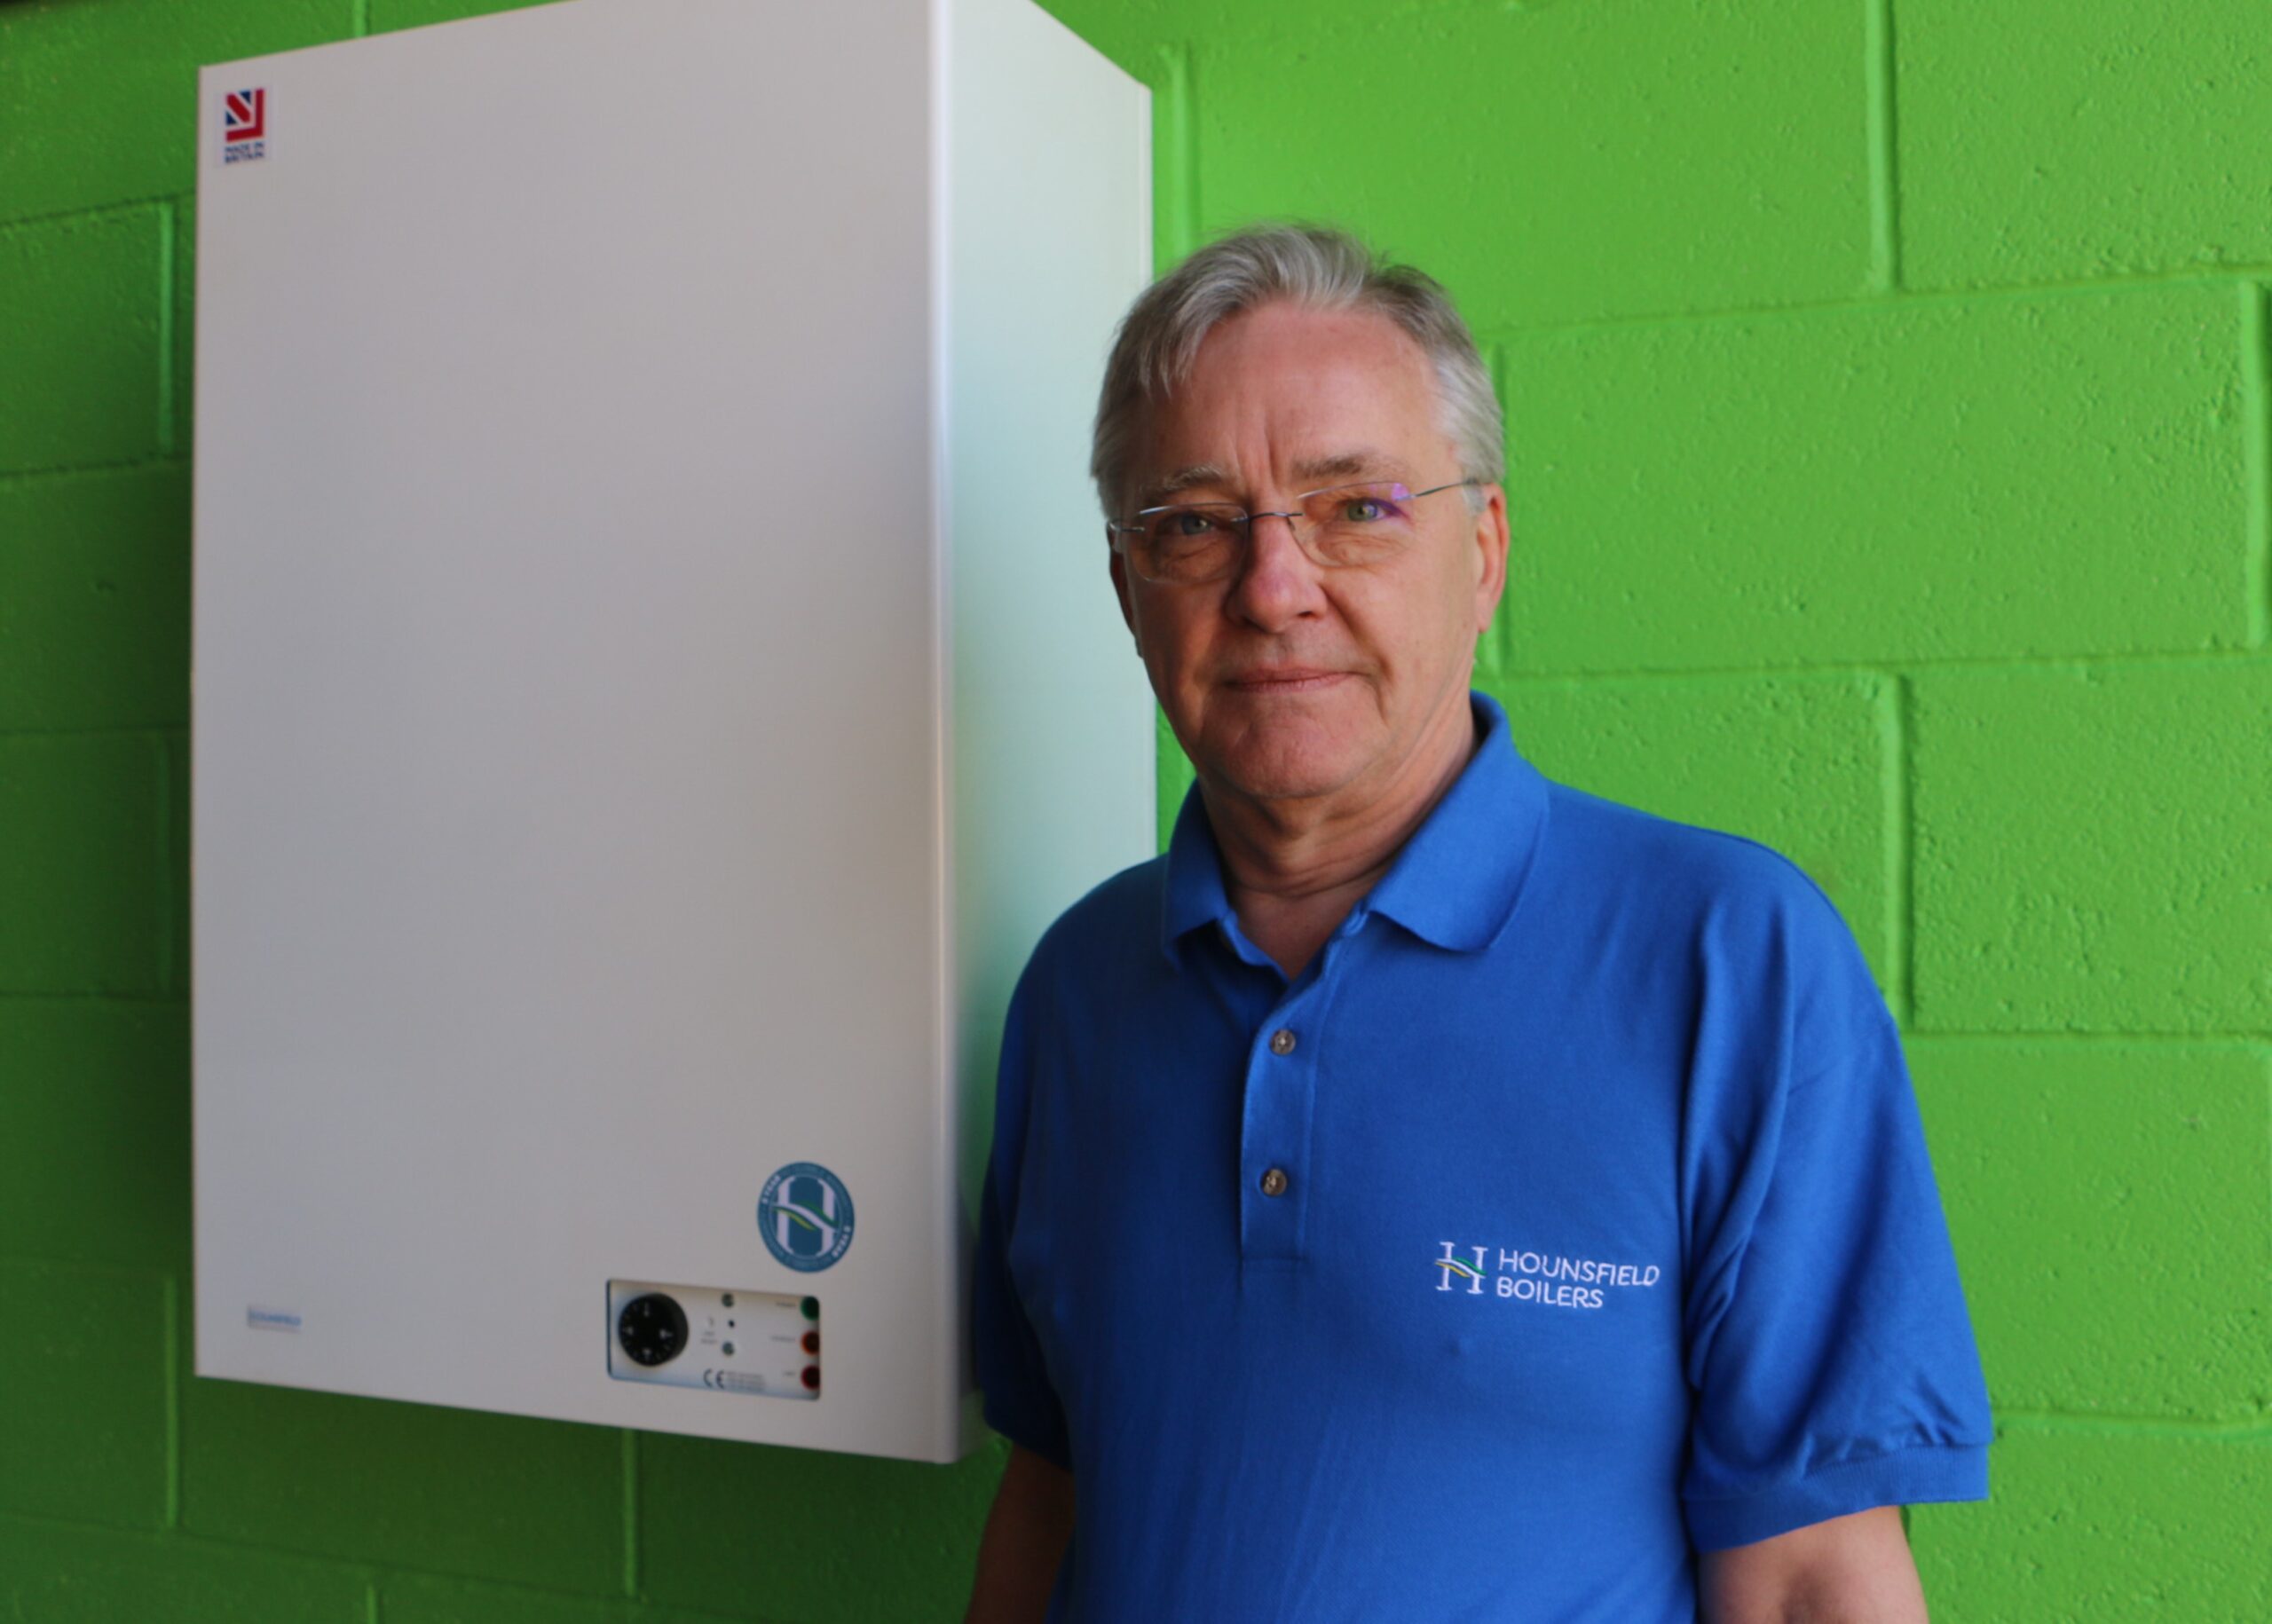 Hounsfield Boilers shortlisted for HVR Awards @AHounsfield